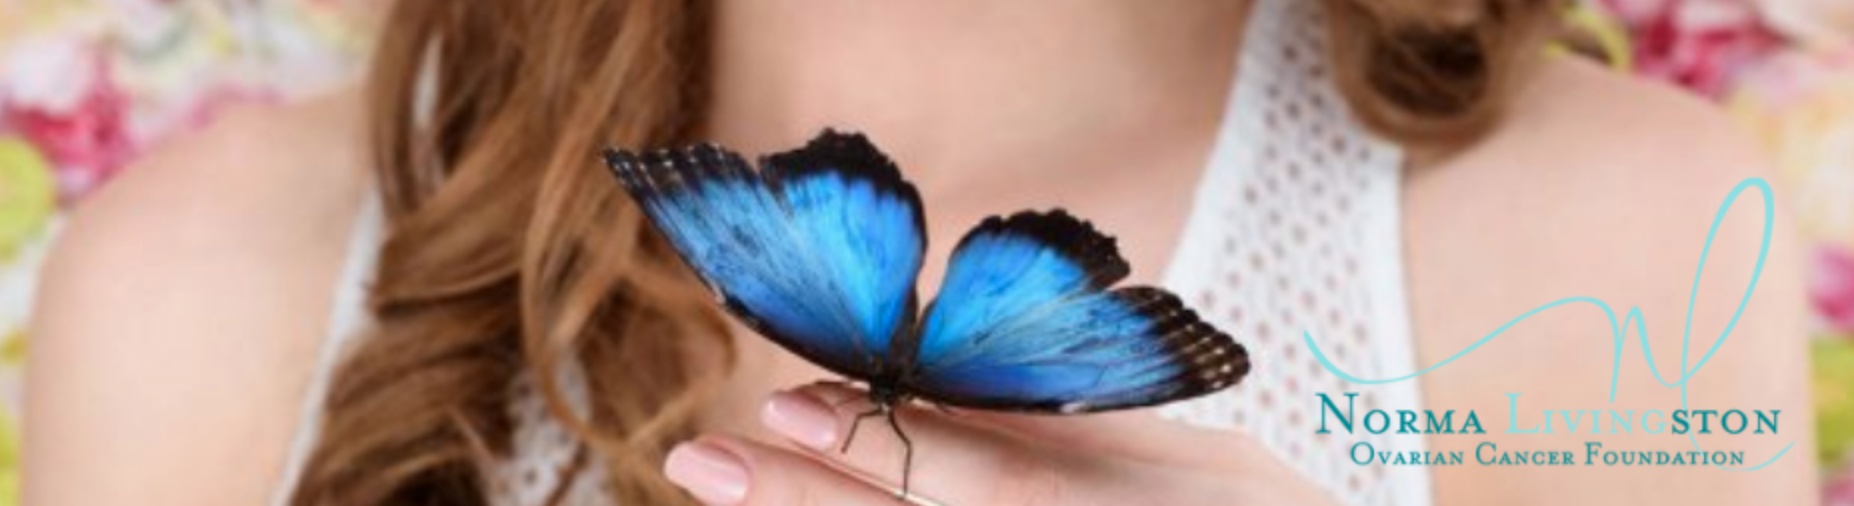 Butterfly release benefit planned to fight ovarian cancer